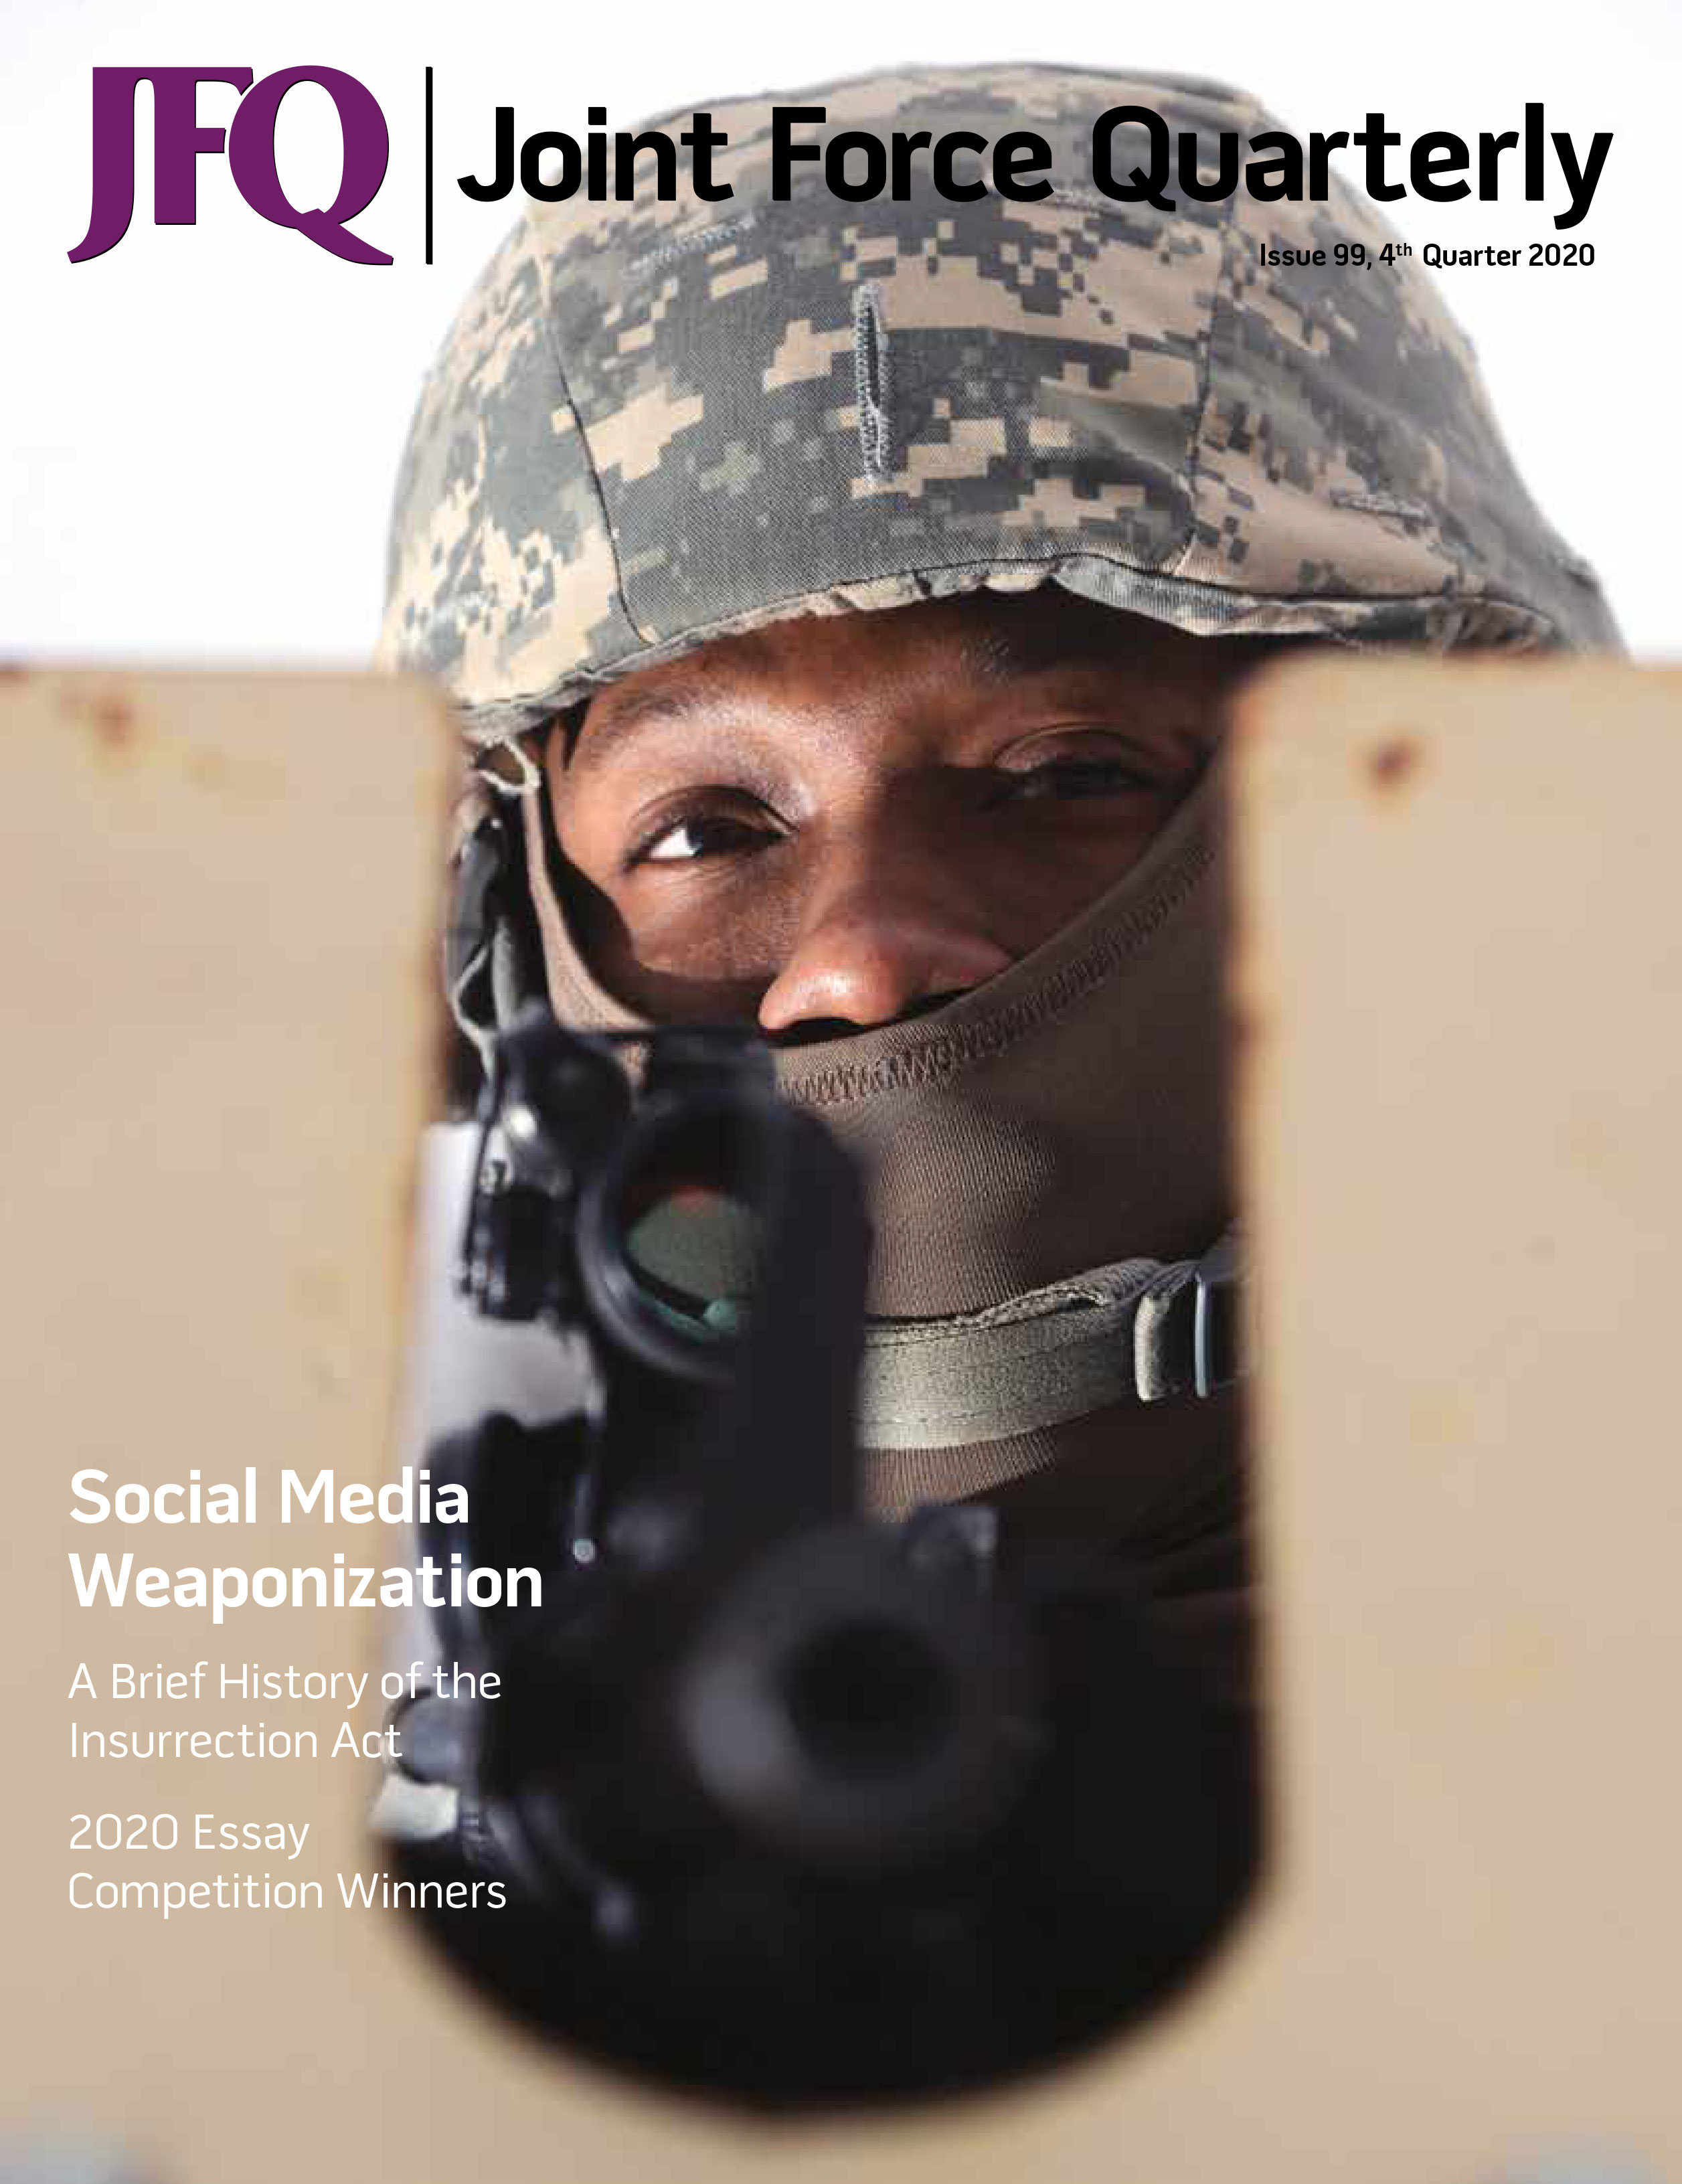 Joint Force Quarterly Journal 4th Quarter 2020